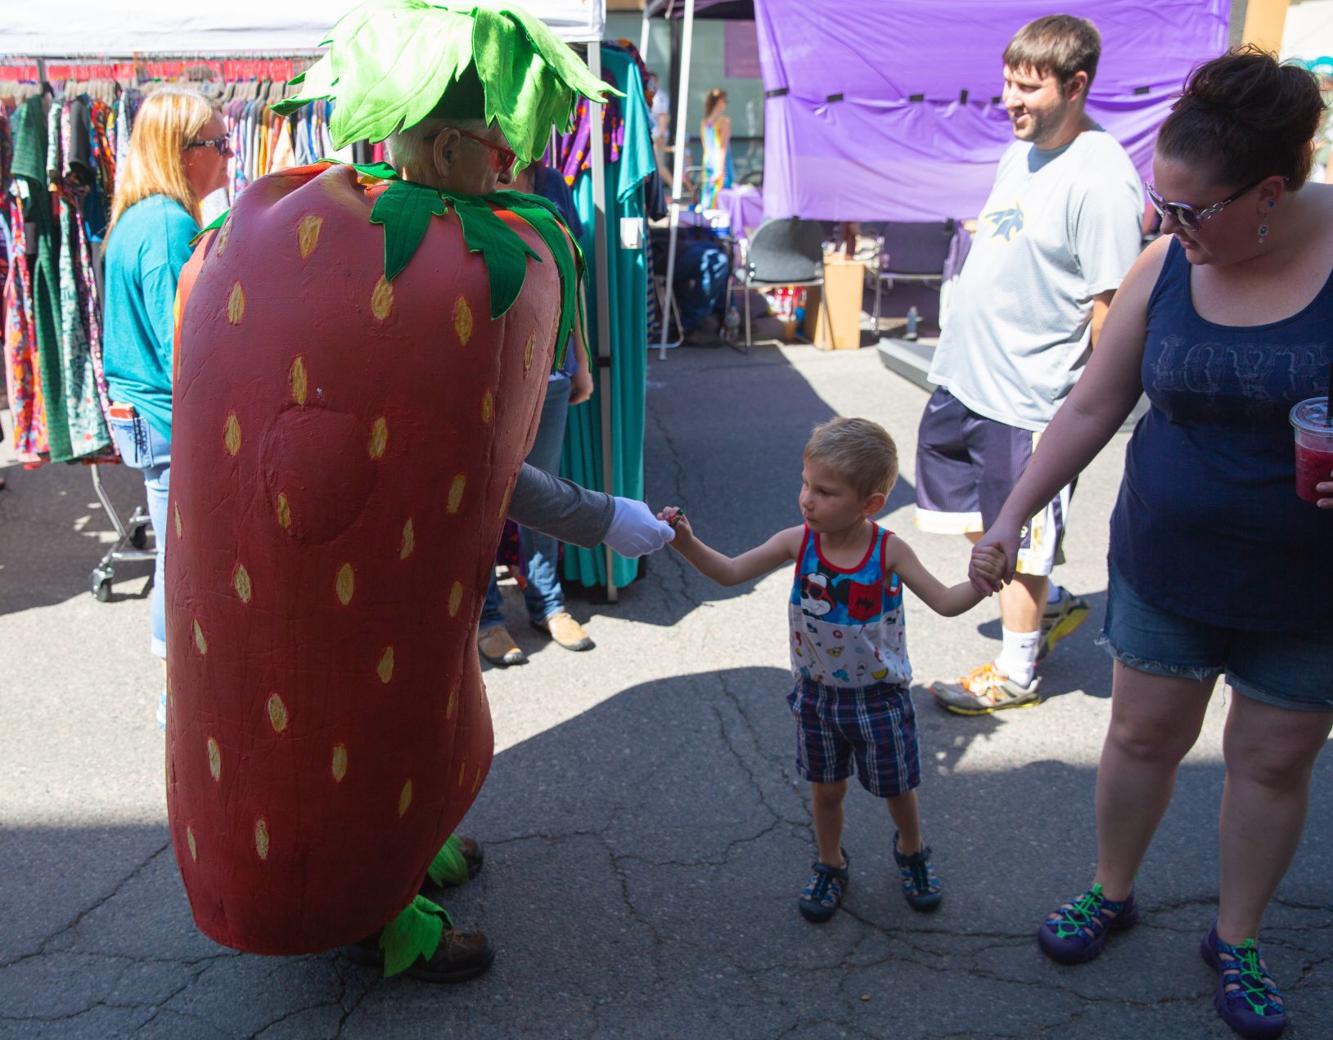 Photos Billings celebrates Strawberry Festival with 60 foot long